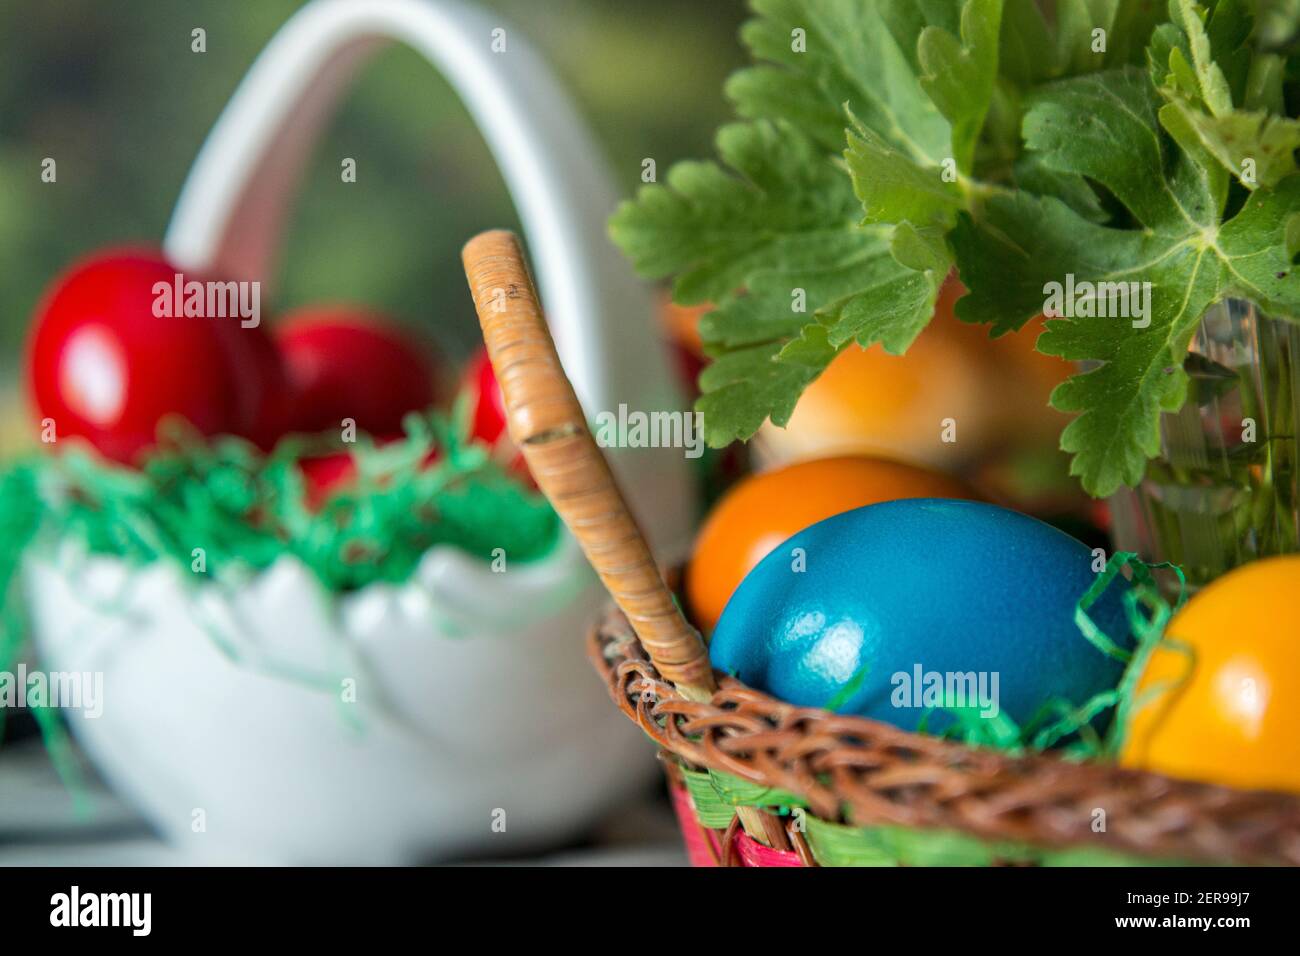 Easter table setting with colored red eggs, bread, green branches decorated, over white plank wooden table with textile tablecloth Stock Photo